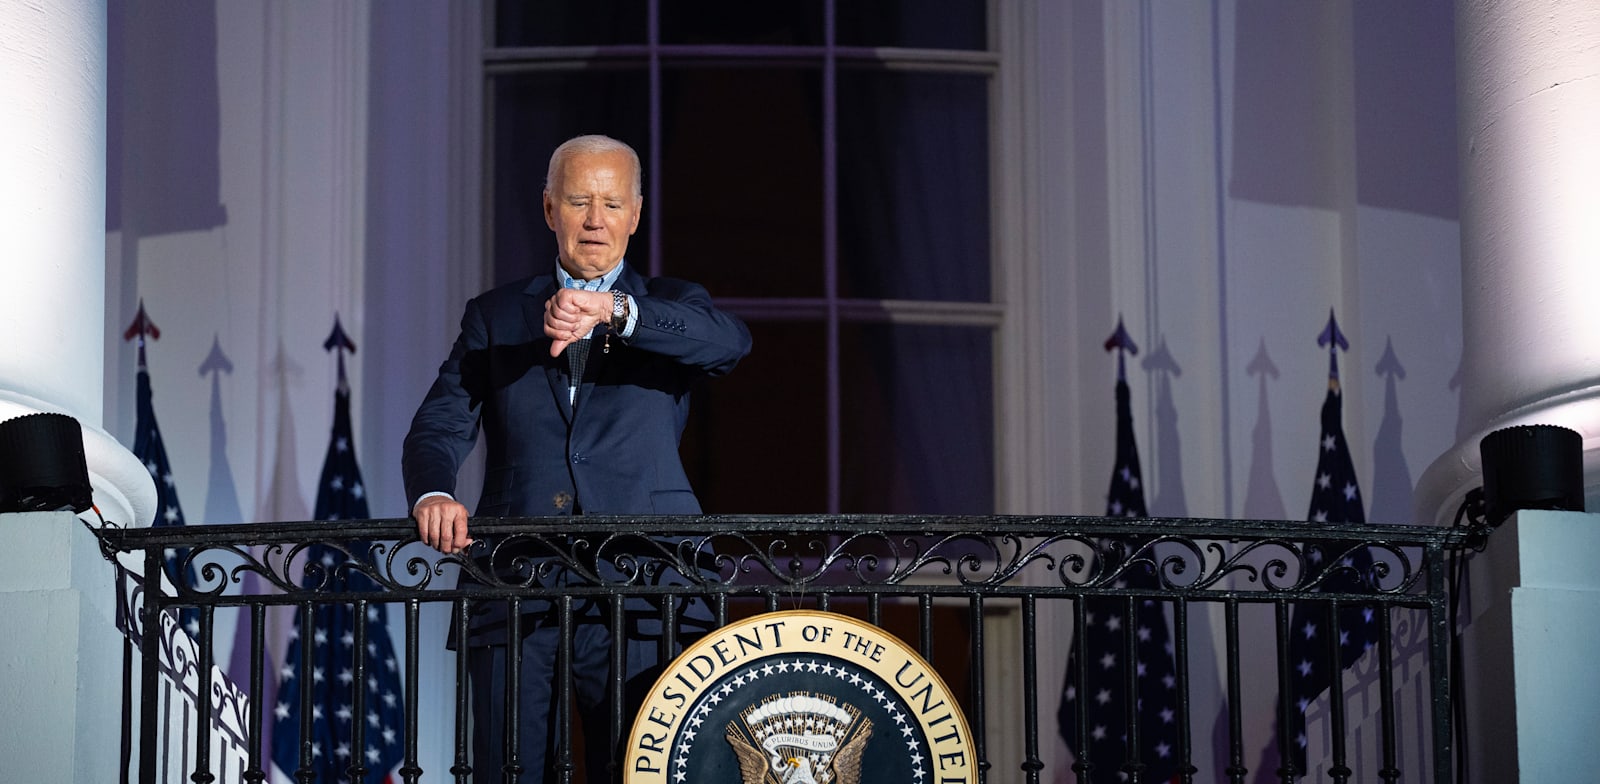 Joe Biden dismisses critics: “They have no clue what they’re talking about”